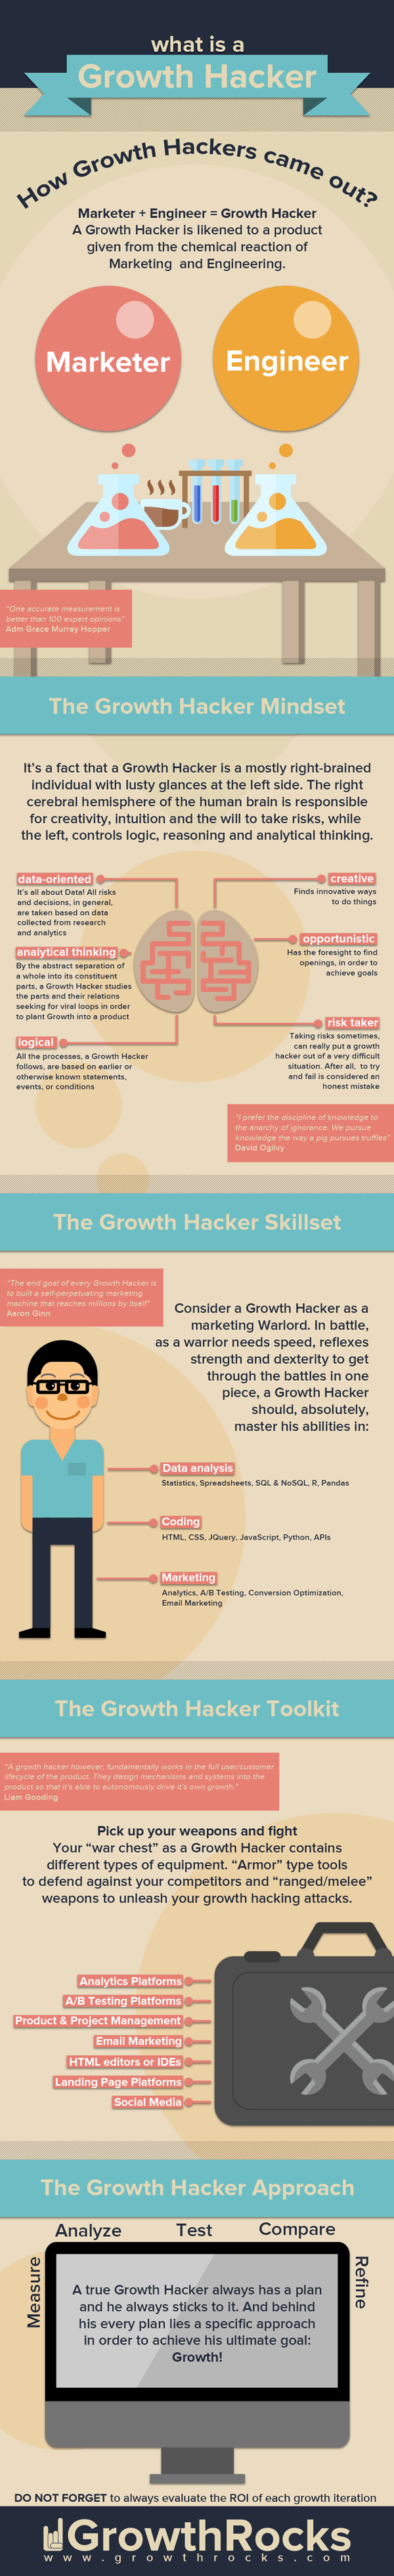 What Is A Growth Hacker? - #infographic #marketing